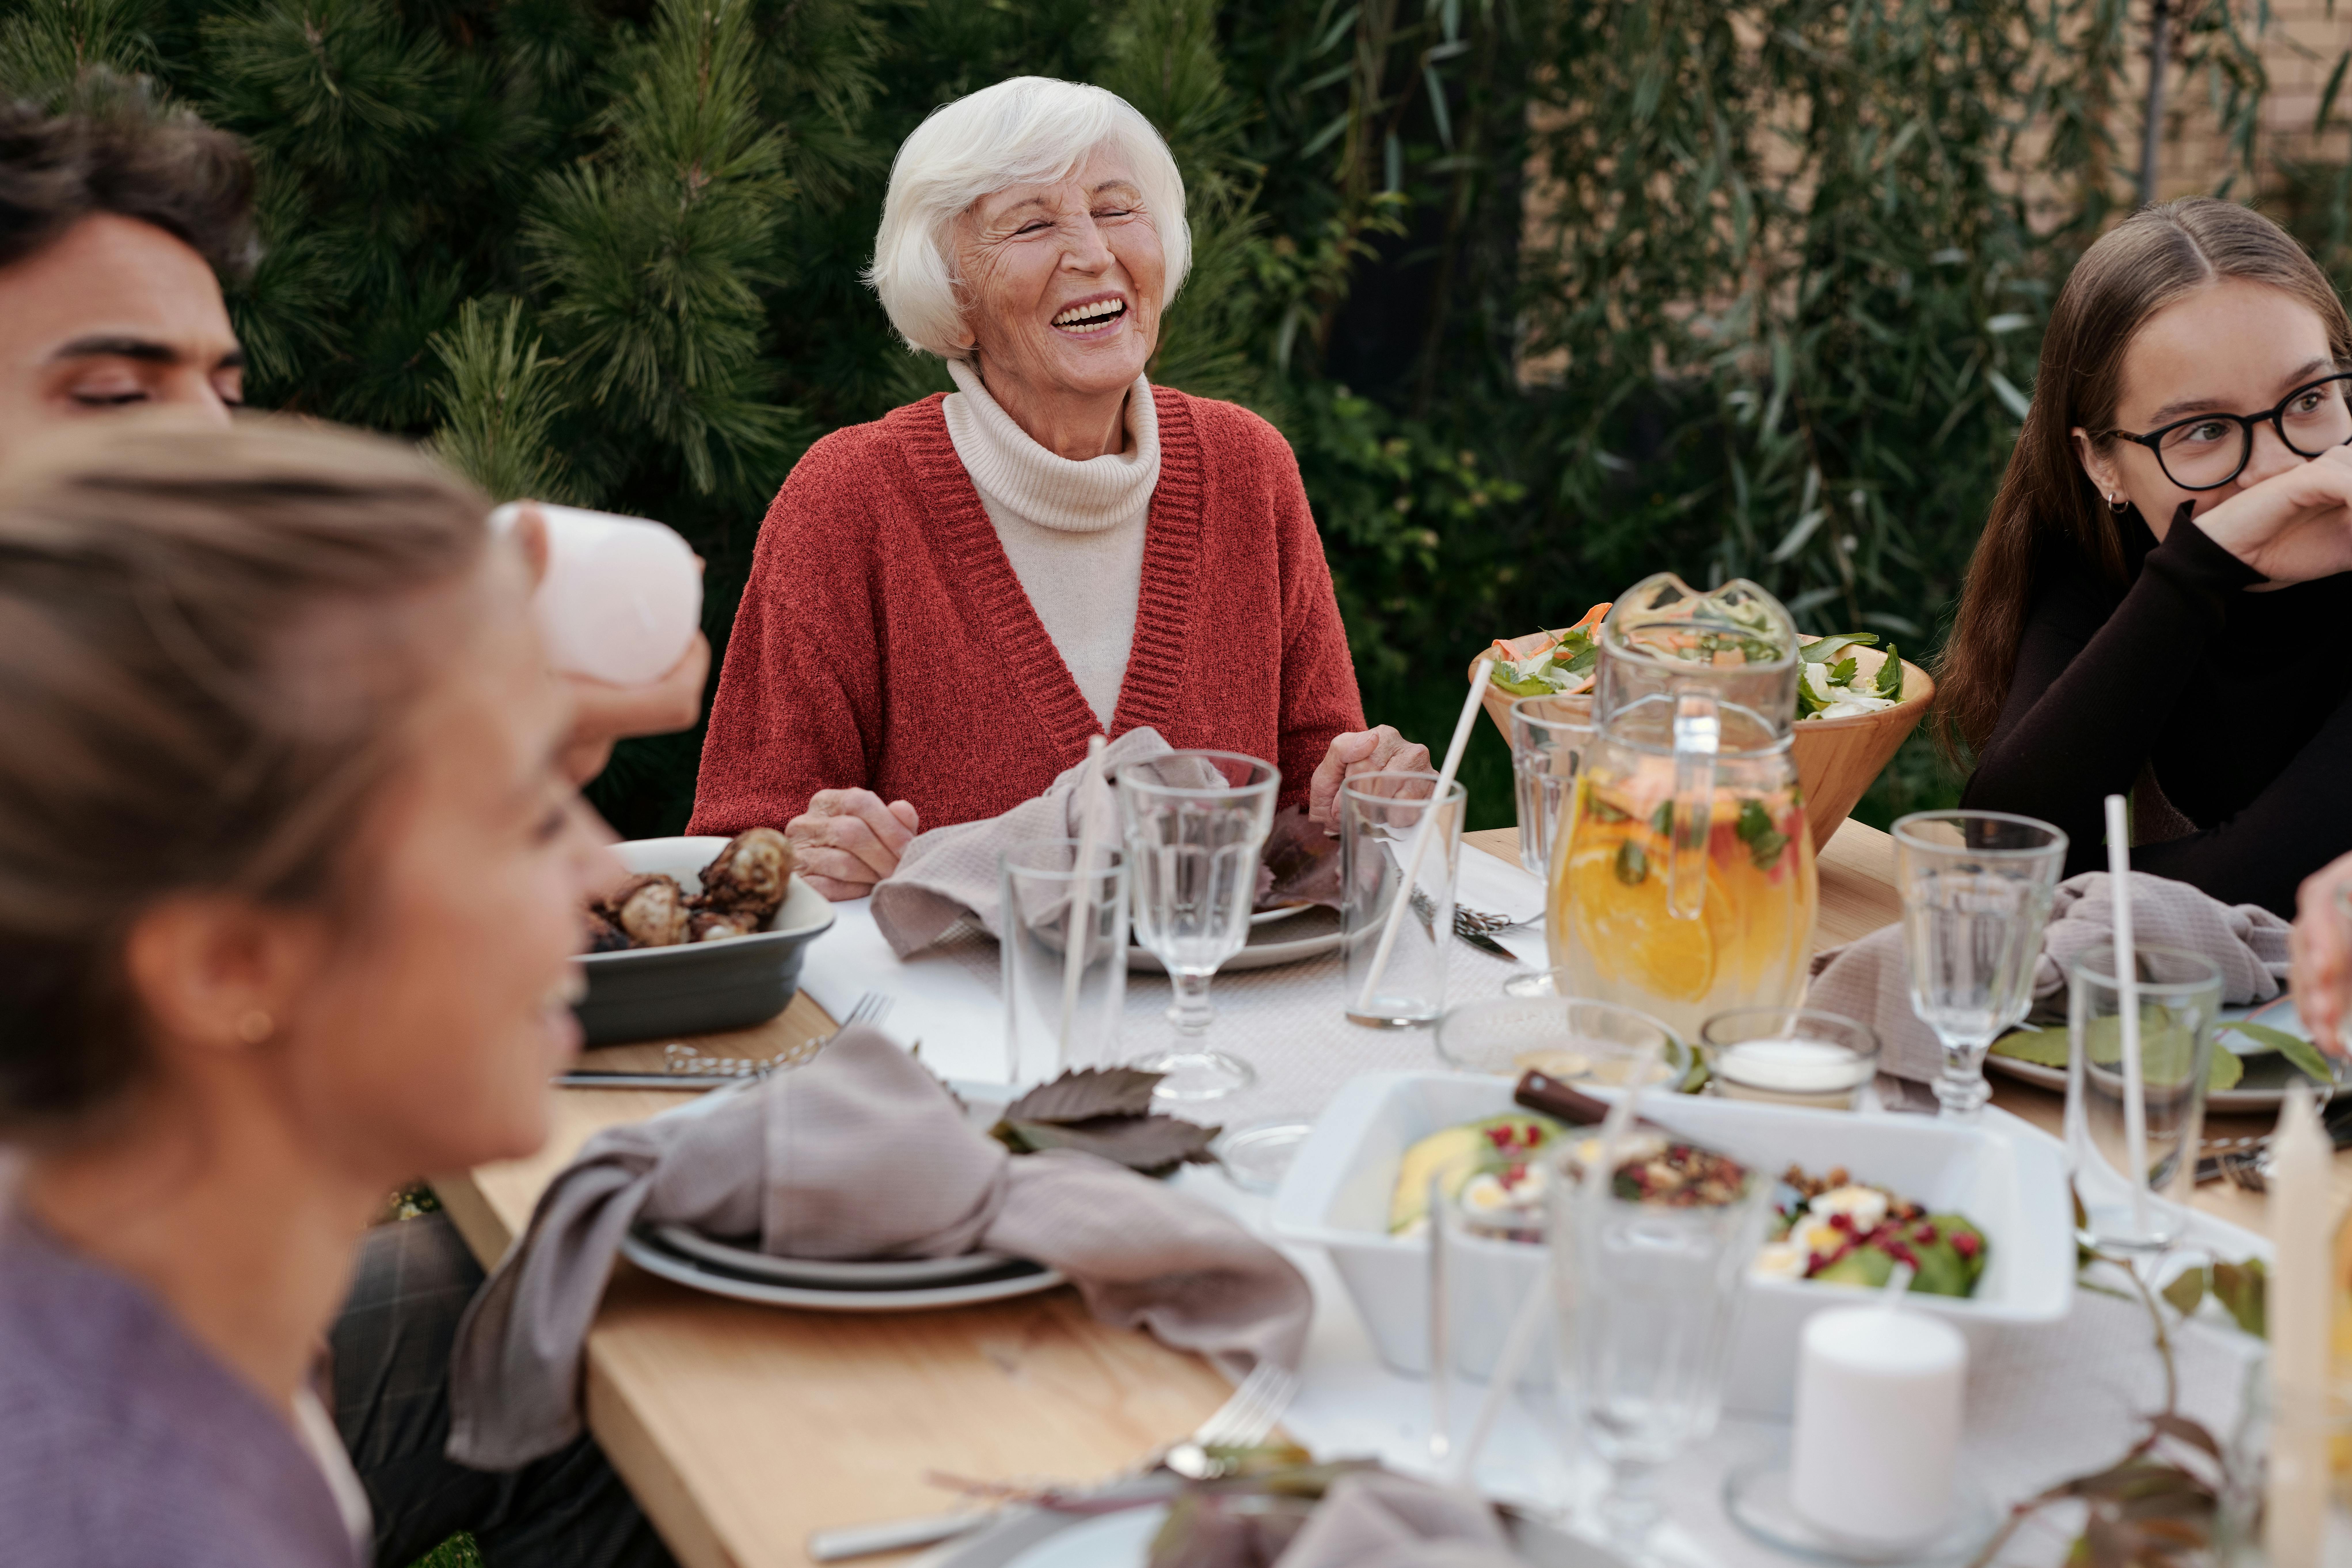 A happy senior woman laughing with her family | Source: Pexels